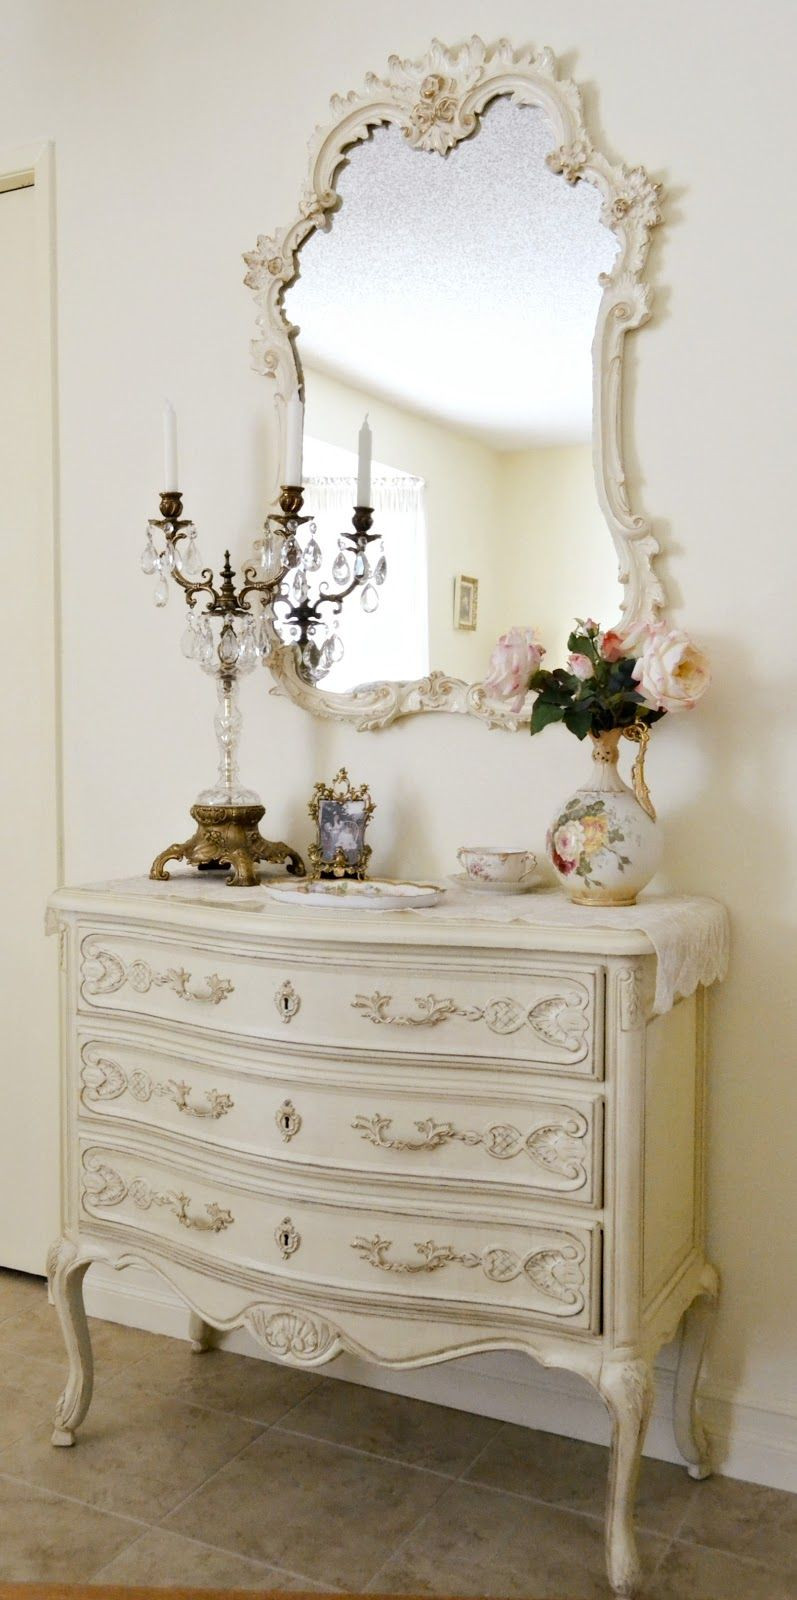 Cheap Shabby Chic Bedroom Furniture
 Jennelise French Furniture